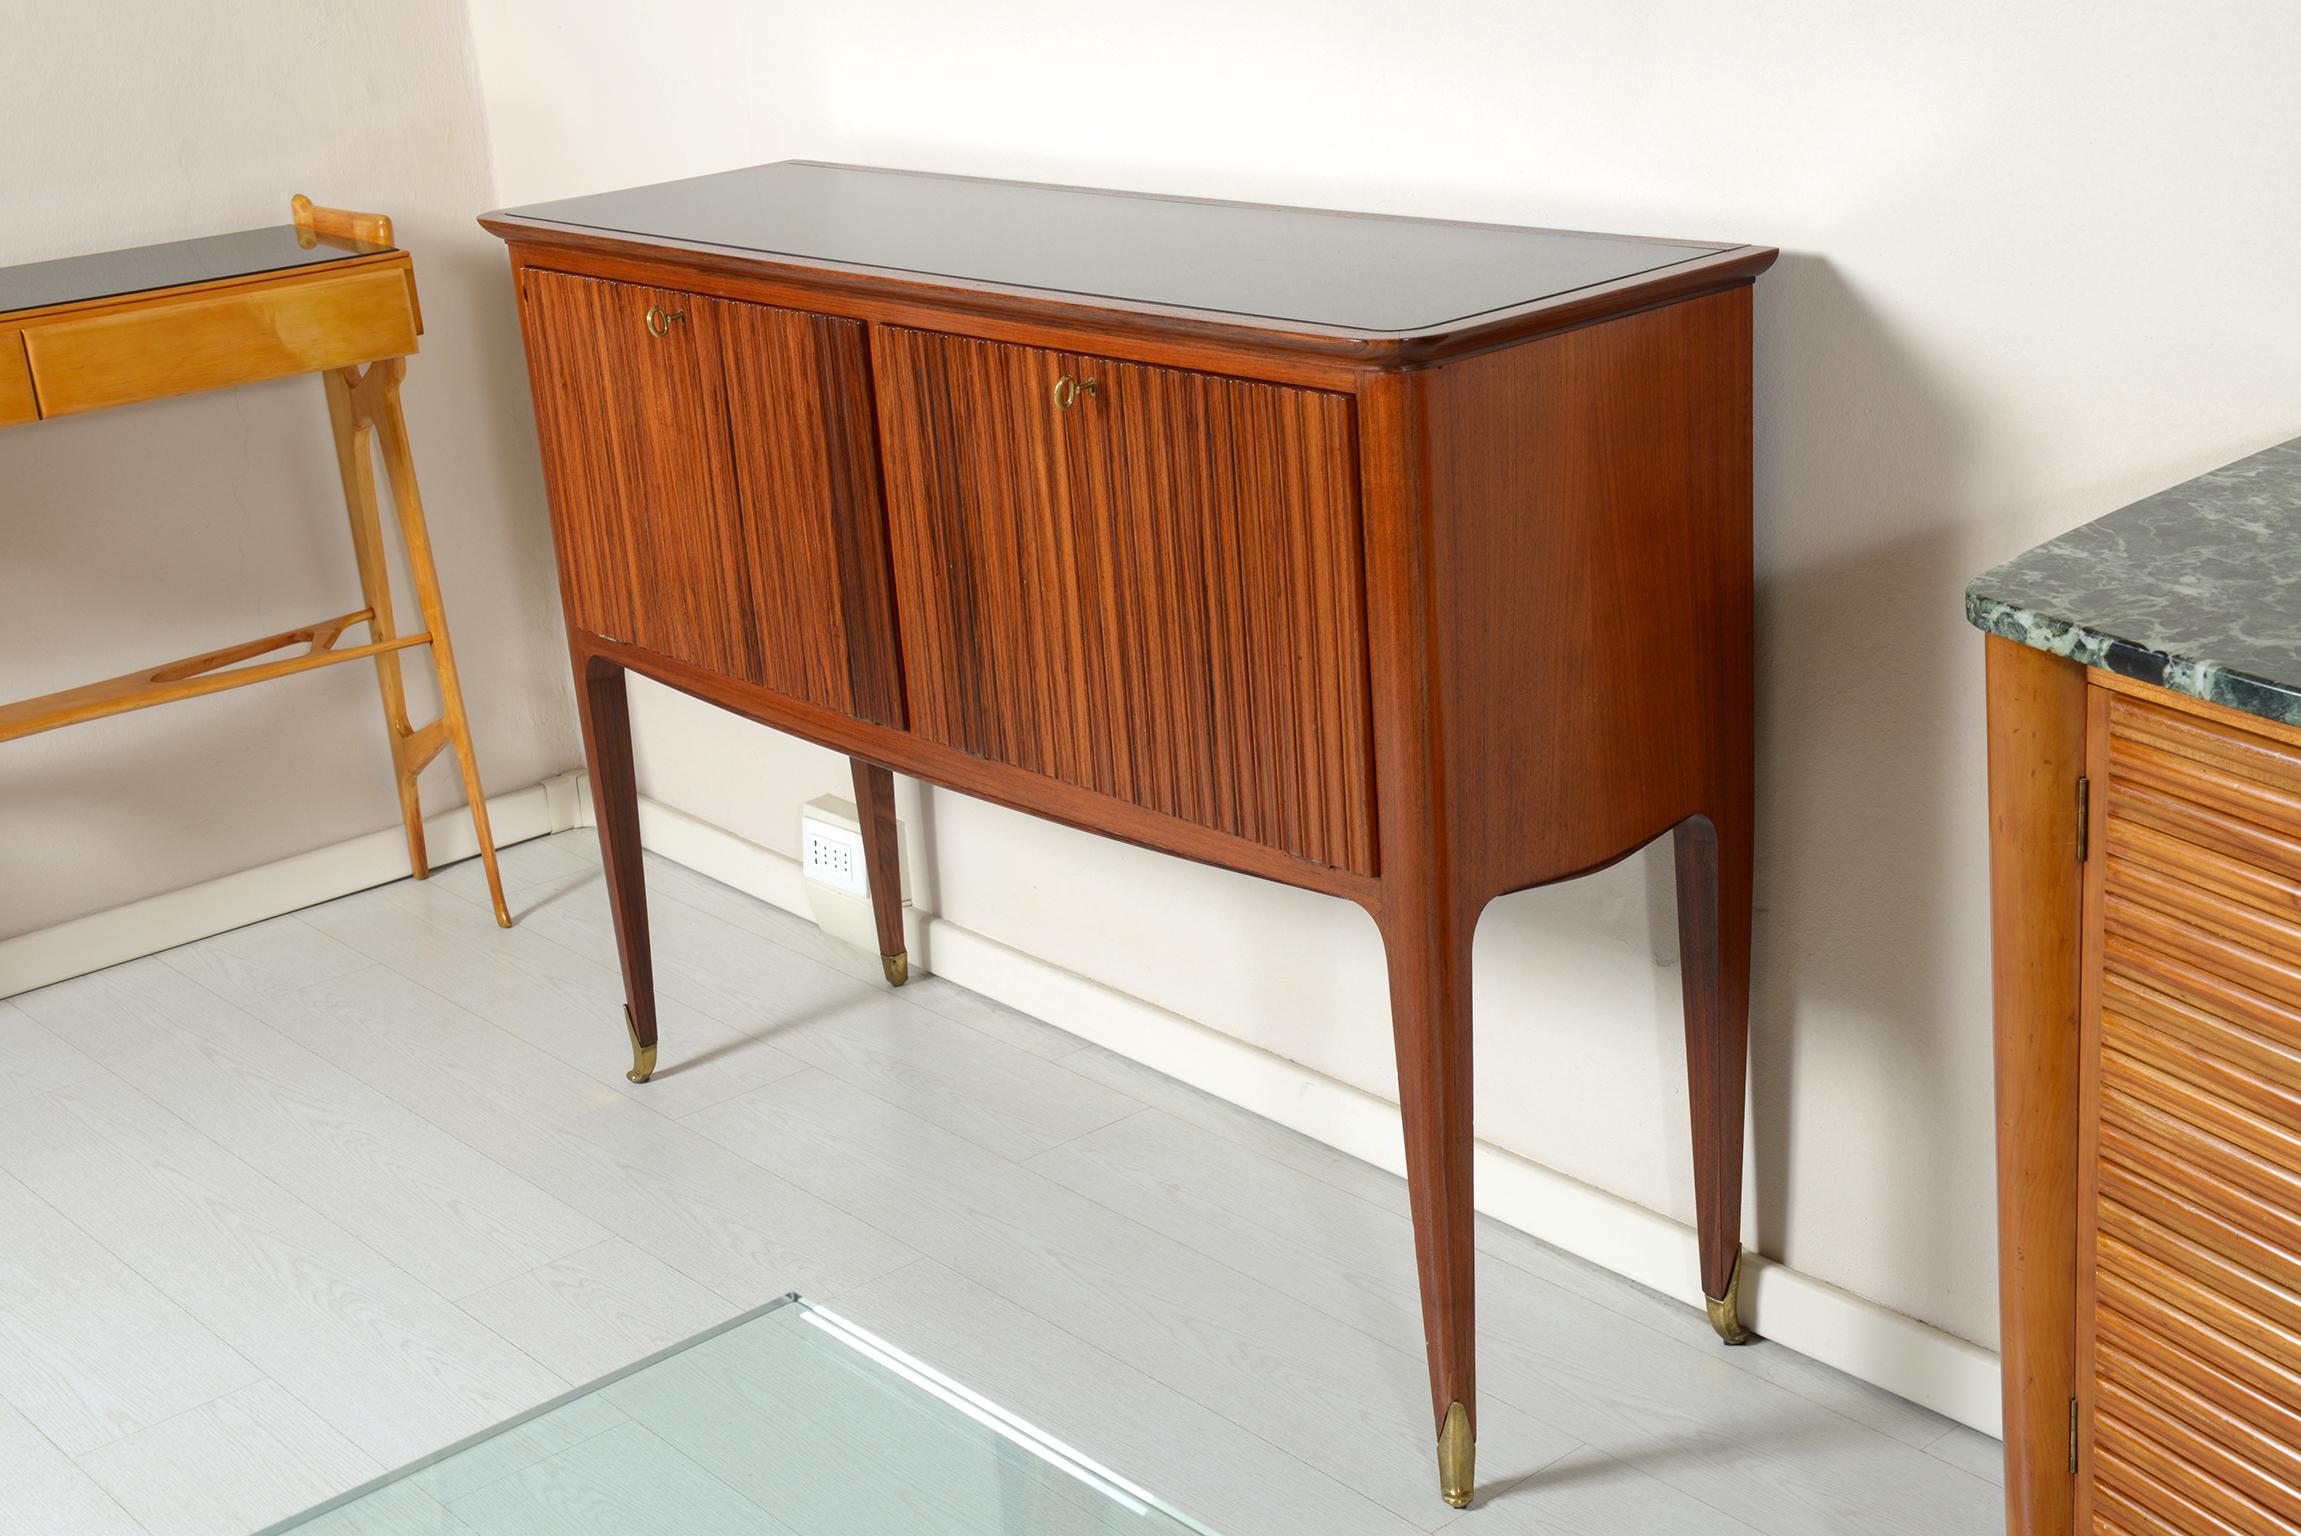 Italian sideboard in walnut grooved body, four slender legs ending with cast brass feet.
Two-flap doors with shelves inside.
Recessed black glass top.
Mid-Century Modern.
           